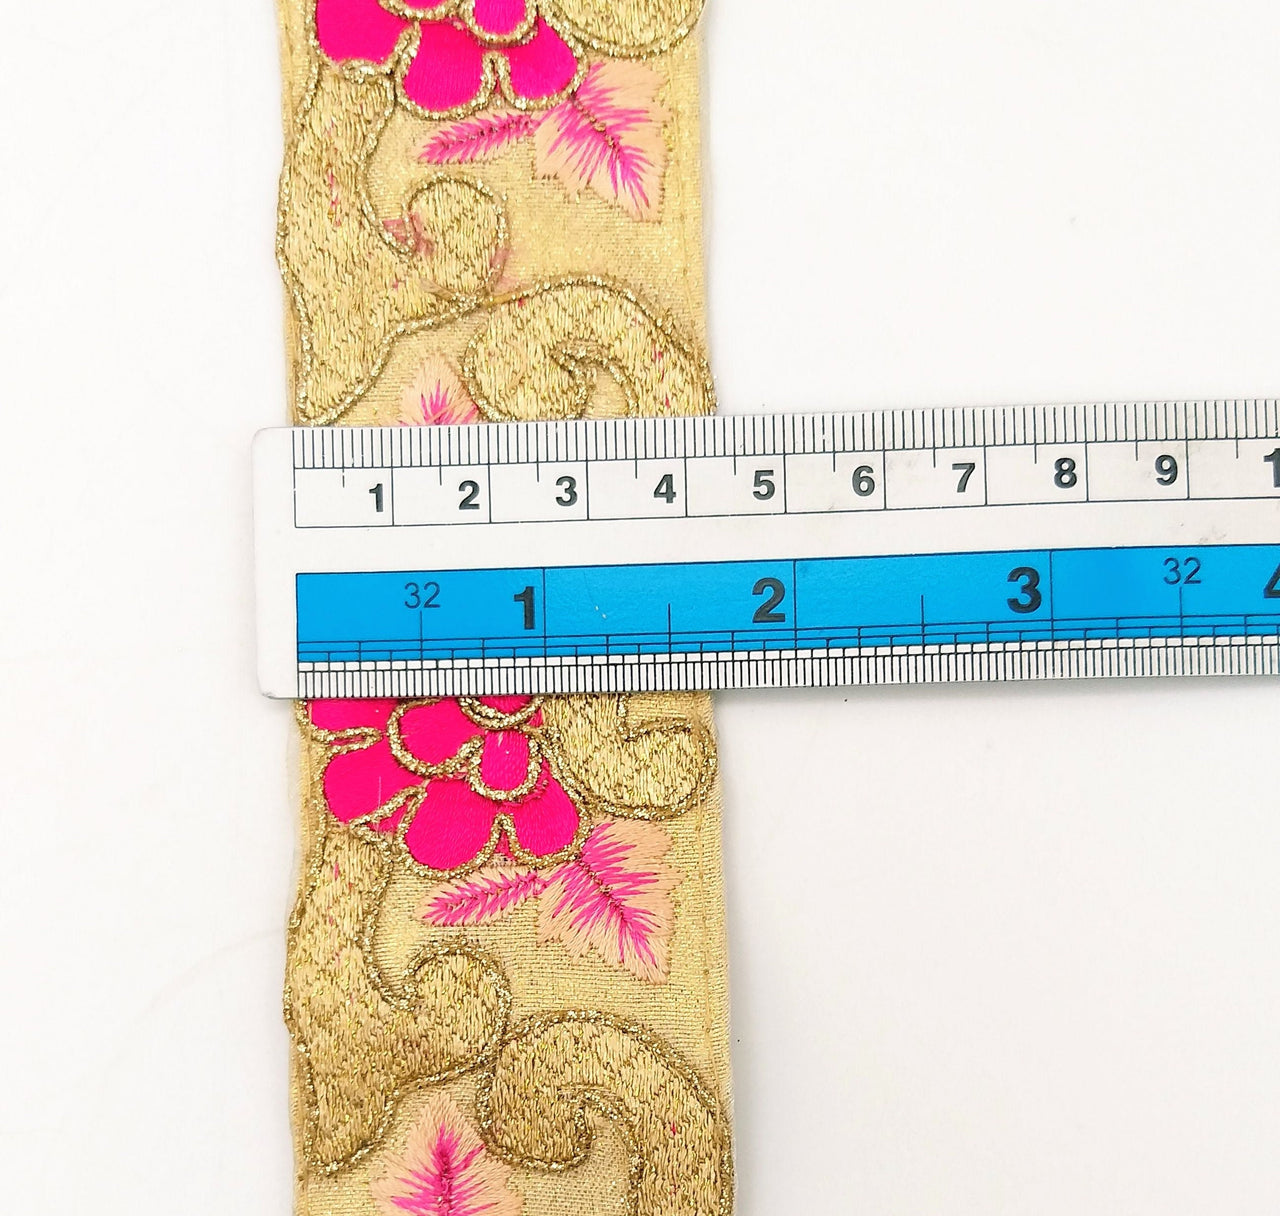 Beige Art Silk Fabric Trim with Floral Embroidery in Peach, Gold and Fuchsia, Flower Embroidered Trim